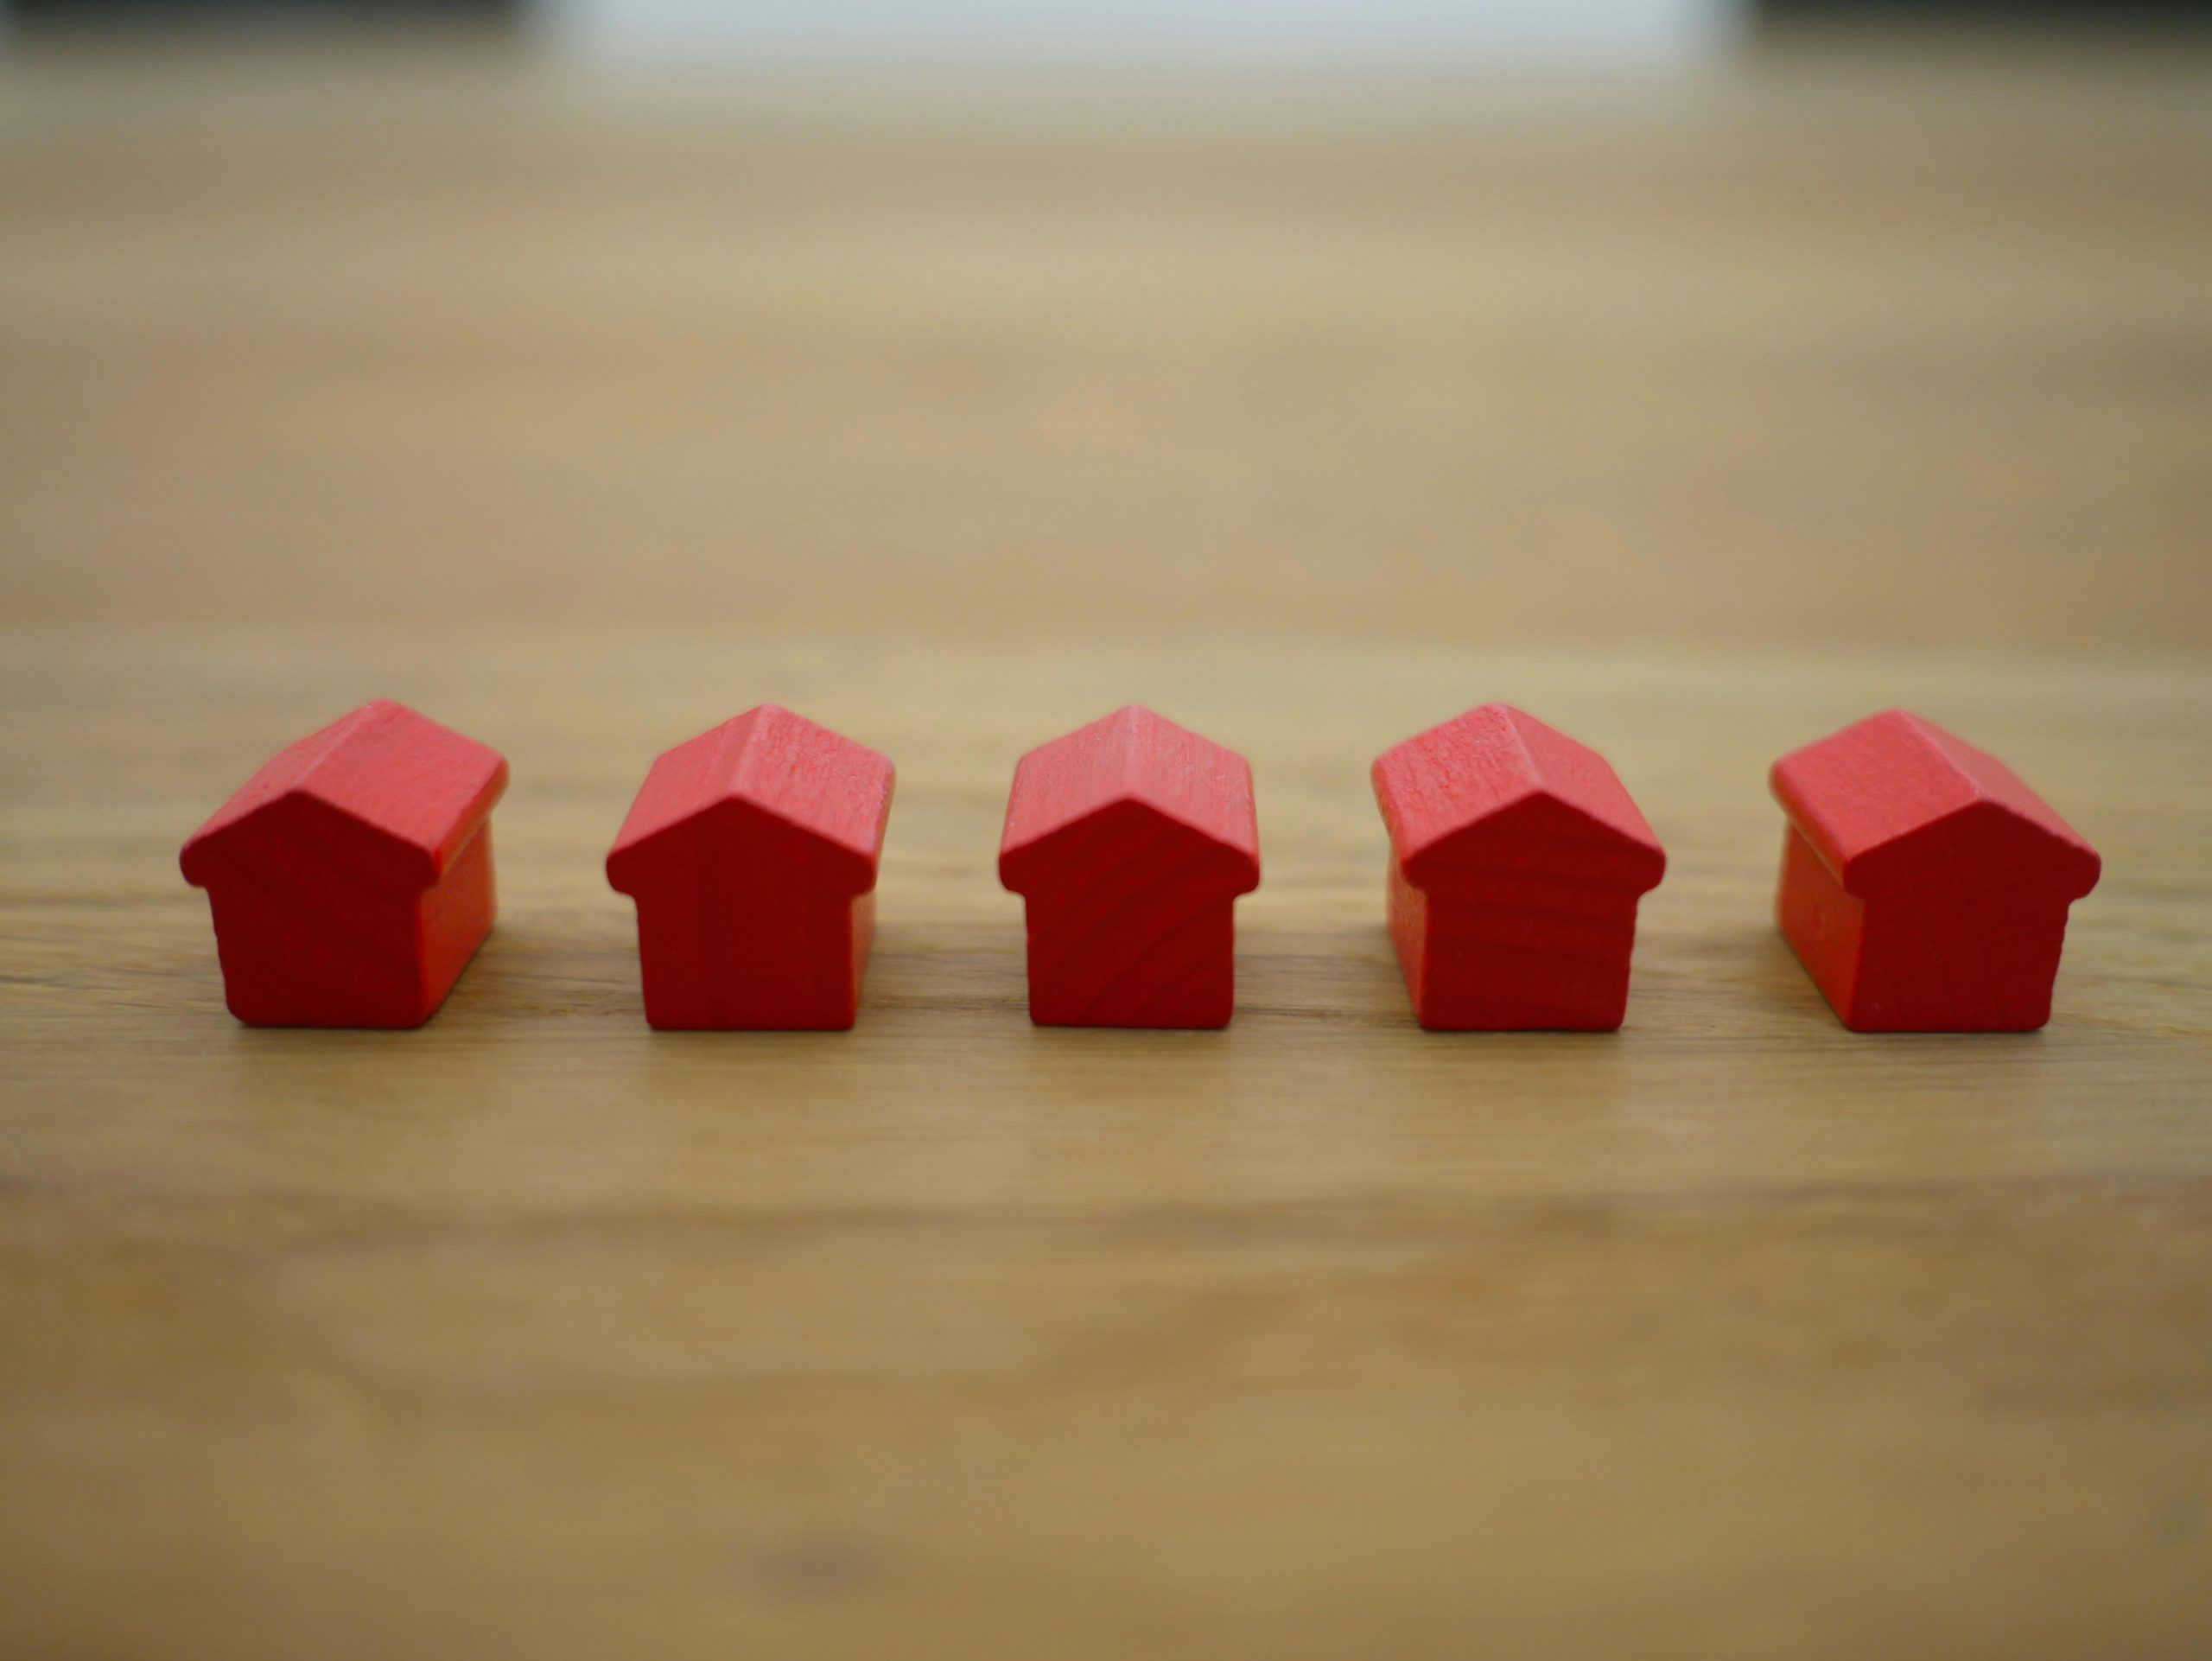 Image shows five small red house figurines lined up on a table to represent Lenders Mortgage Insurance.